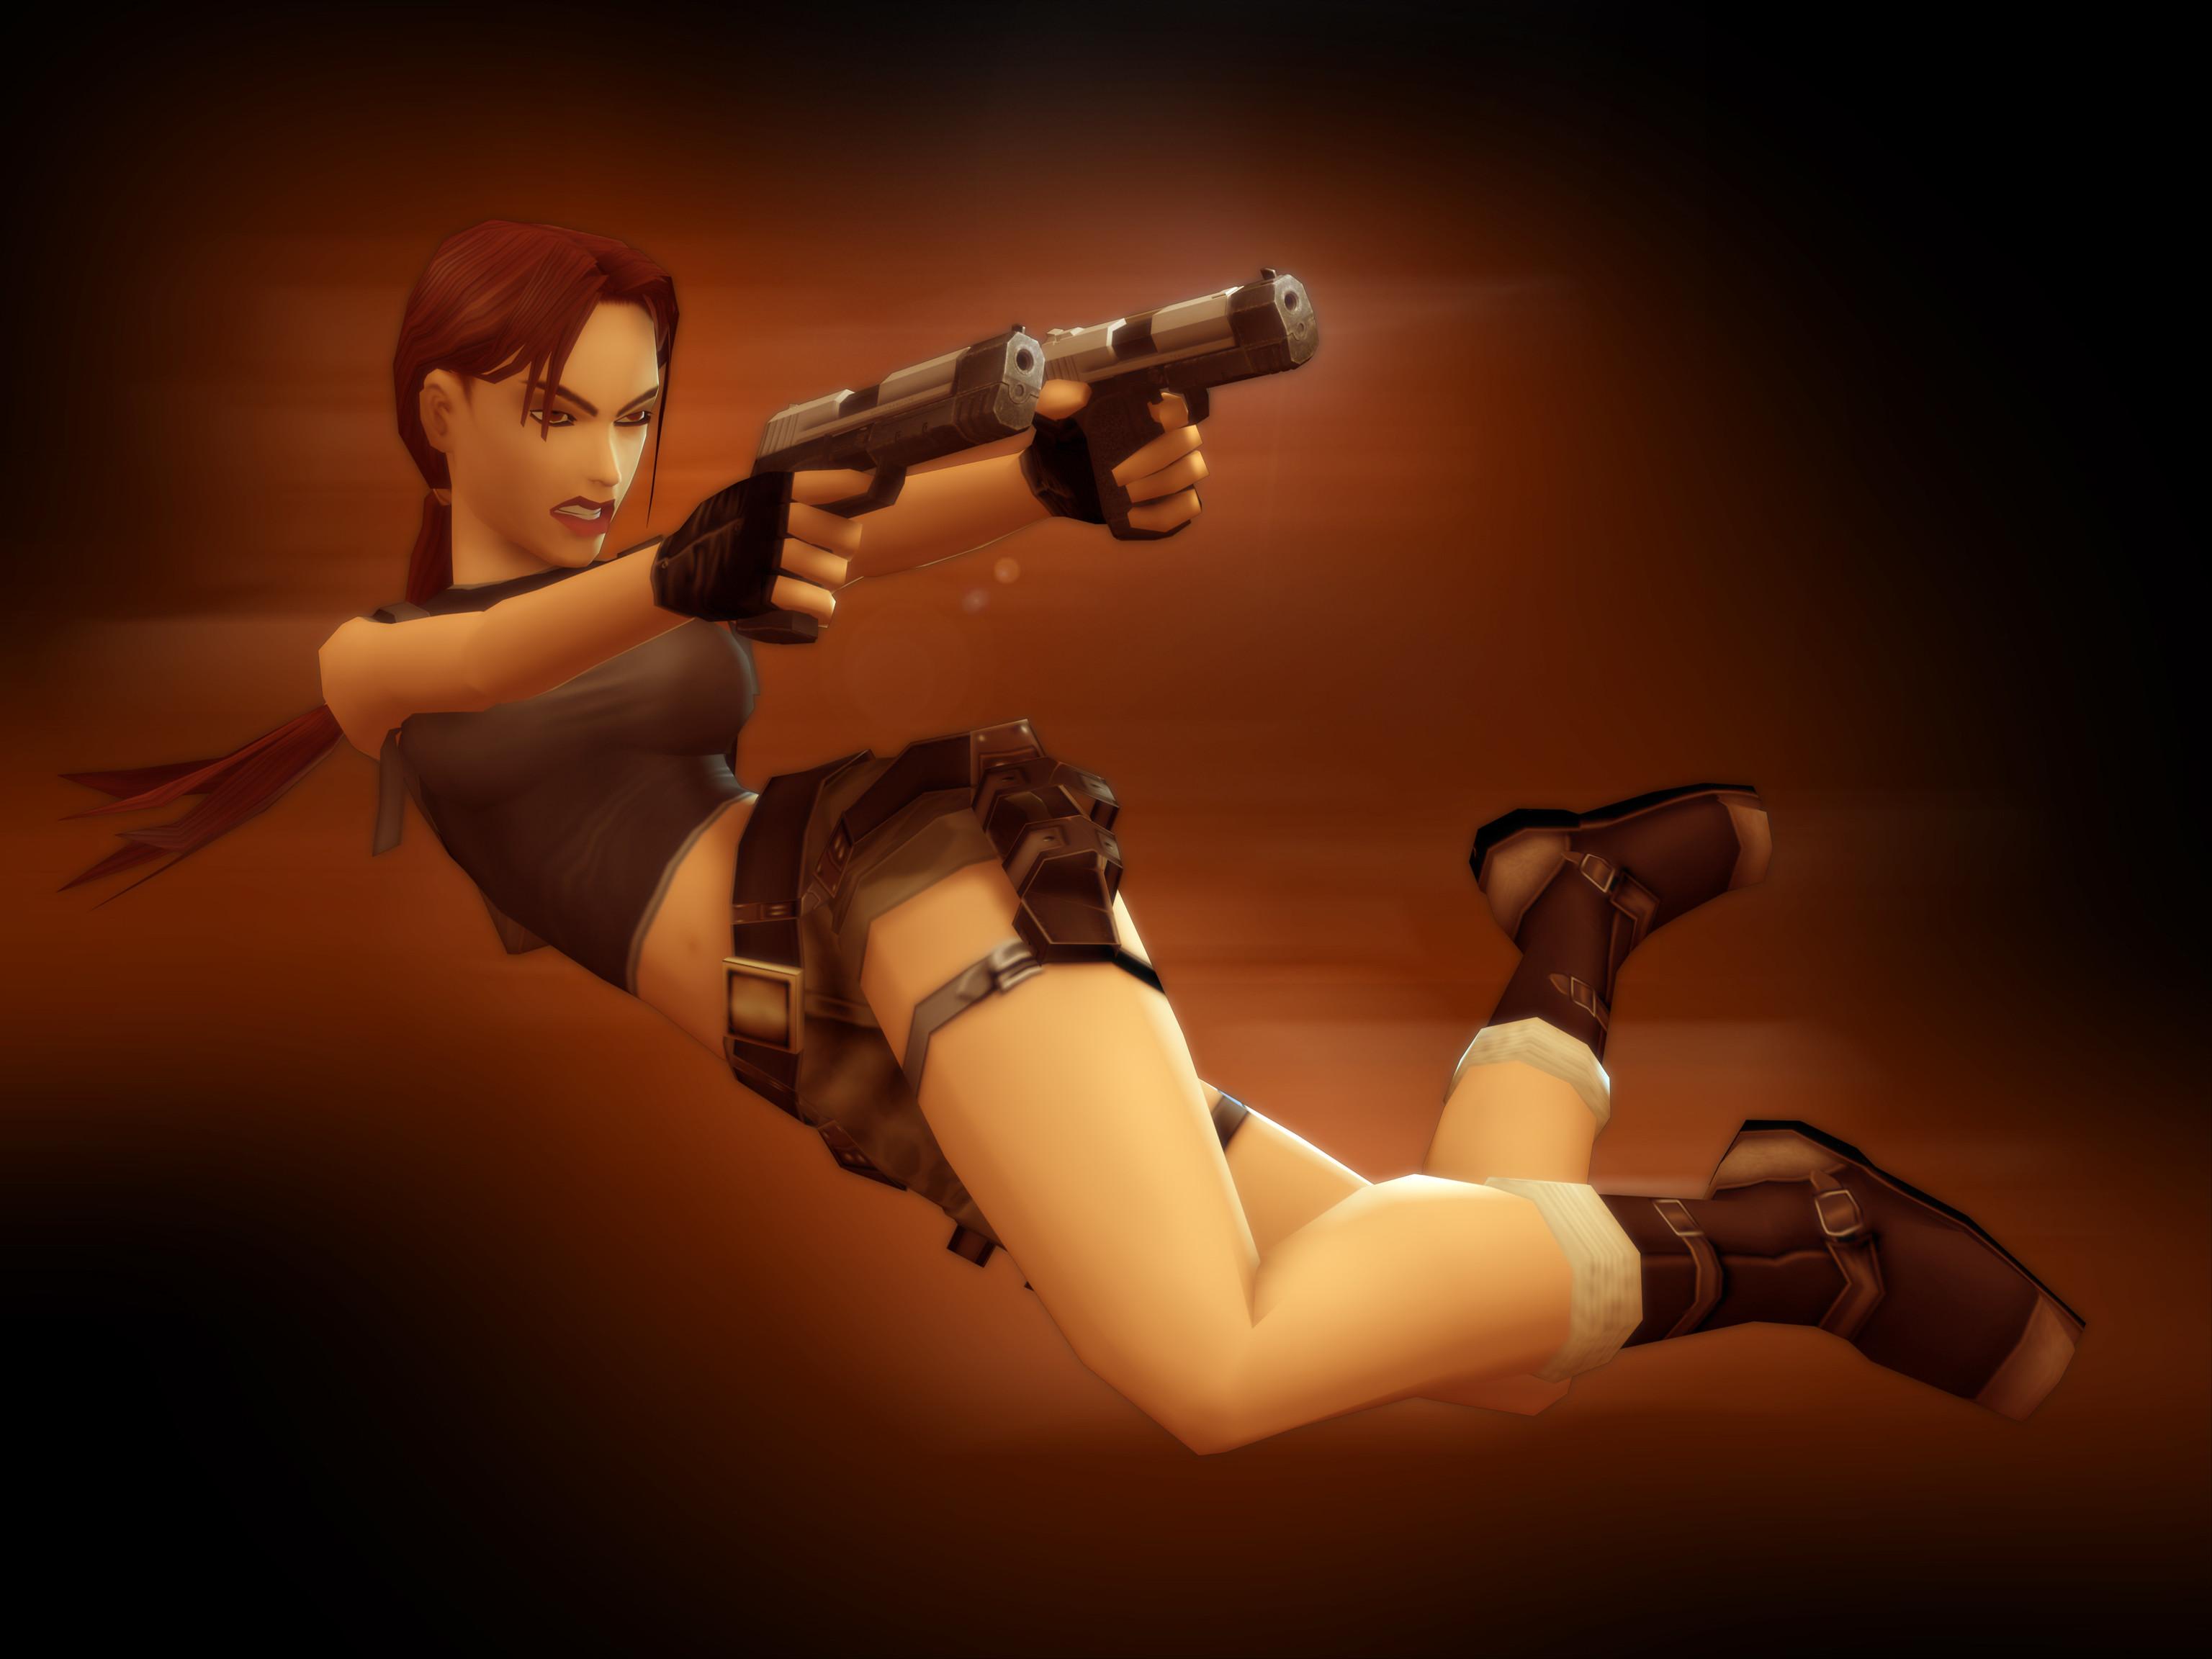 An action-packed image of Lara Croft in mid-air with dual pistols, set against a warm, sepia-toned background, showcasing agility and combat readiness.